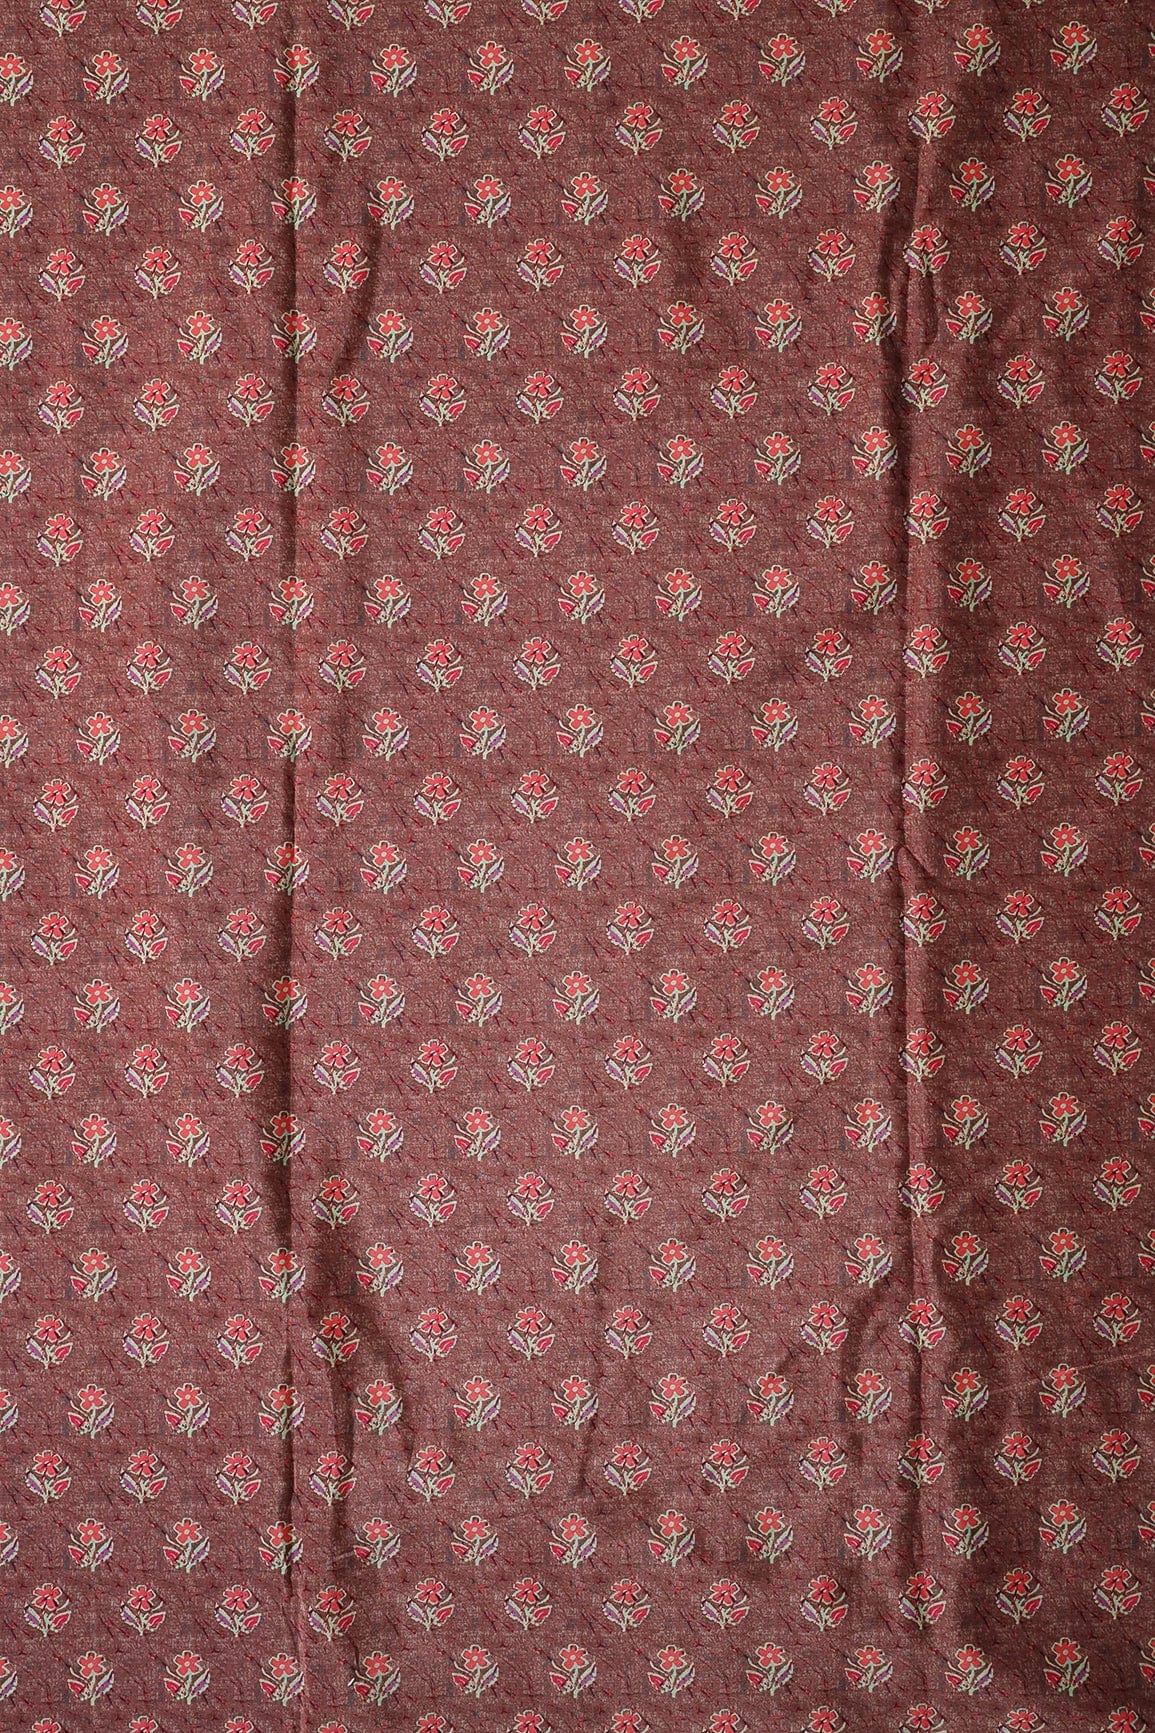 doeraa Prints Peach And Pink Floral Pattern Digital Print On Brown French Crepe Fabric